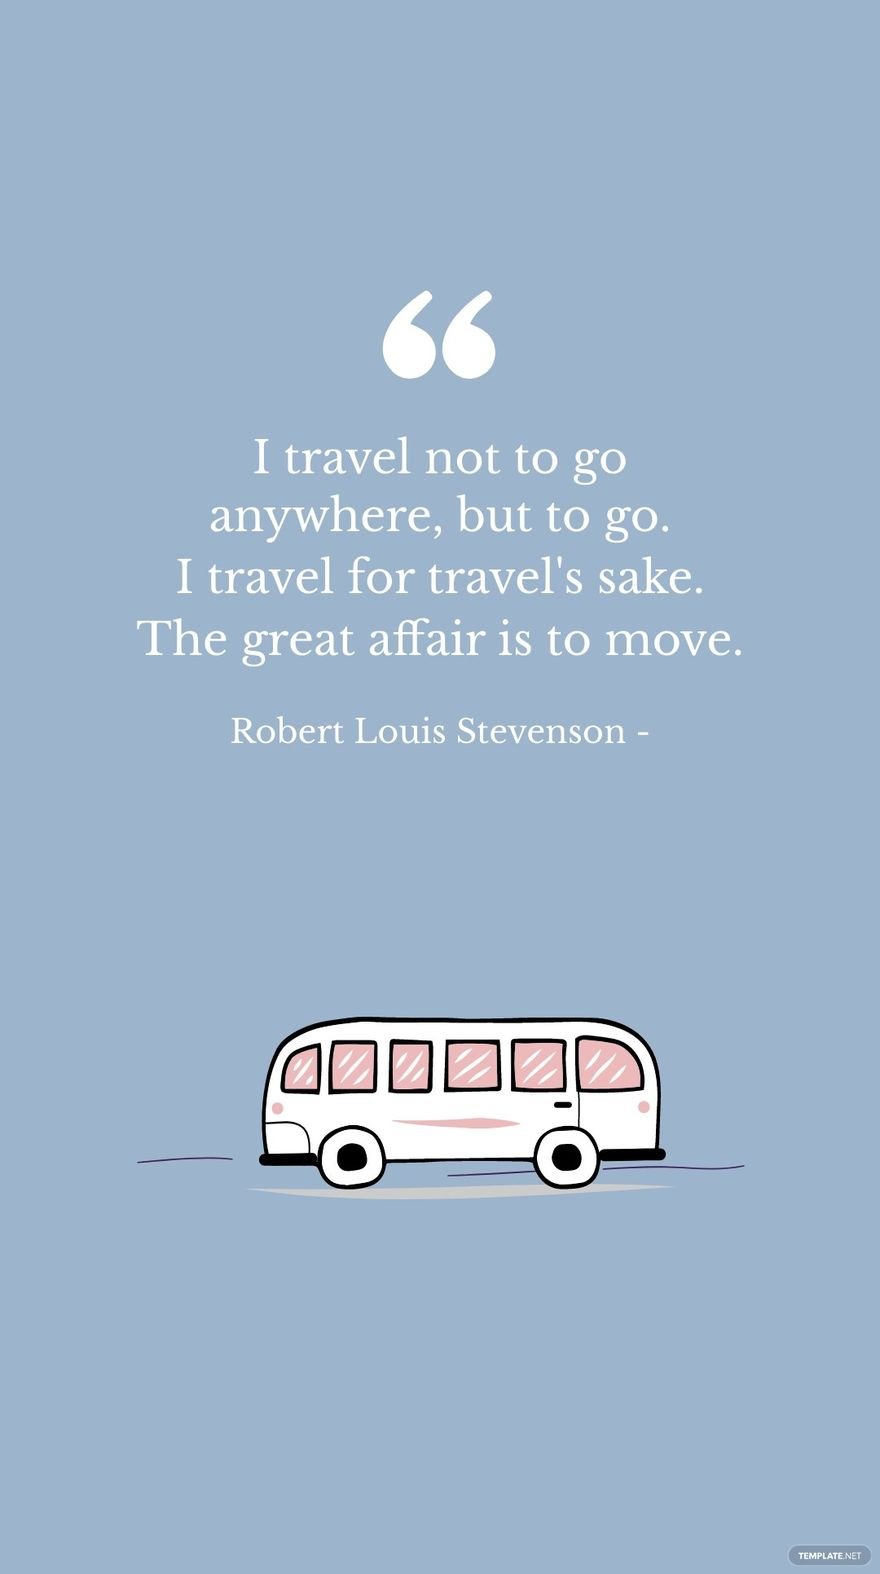 Free Robert Louis Stevenson - I travel not to go anywhere, but to go. I travel for travel's sake. The great affair is to move. in JPG